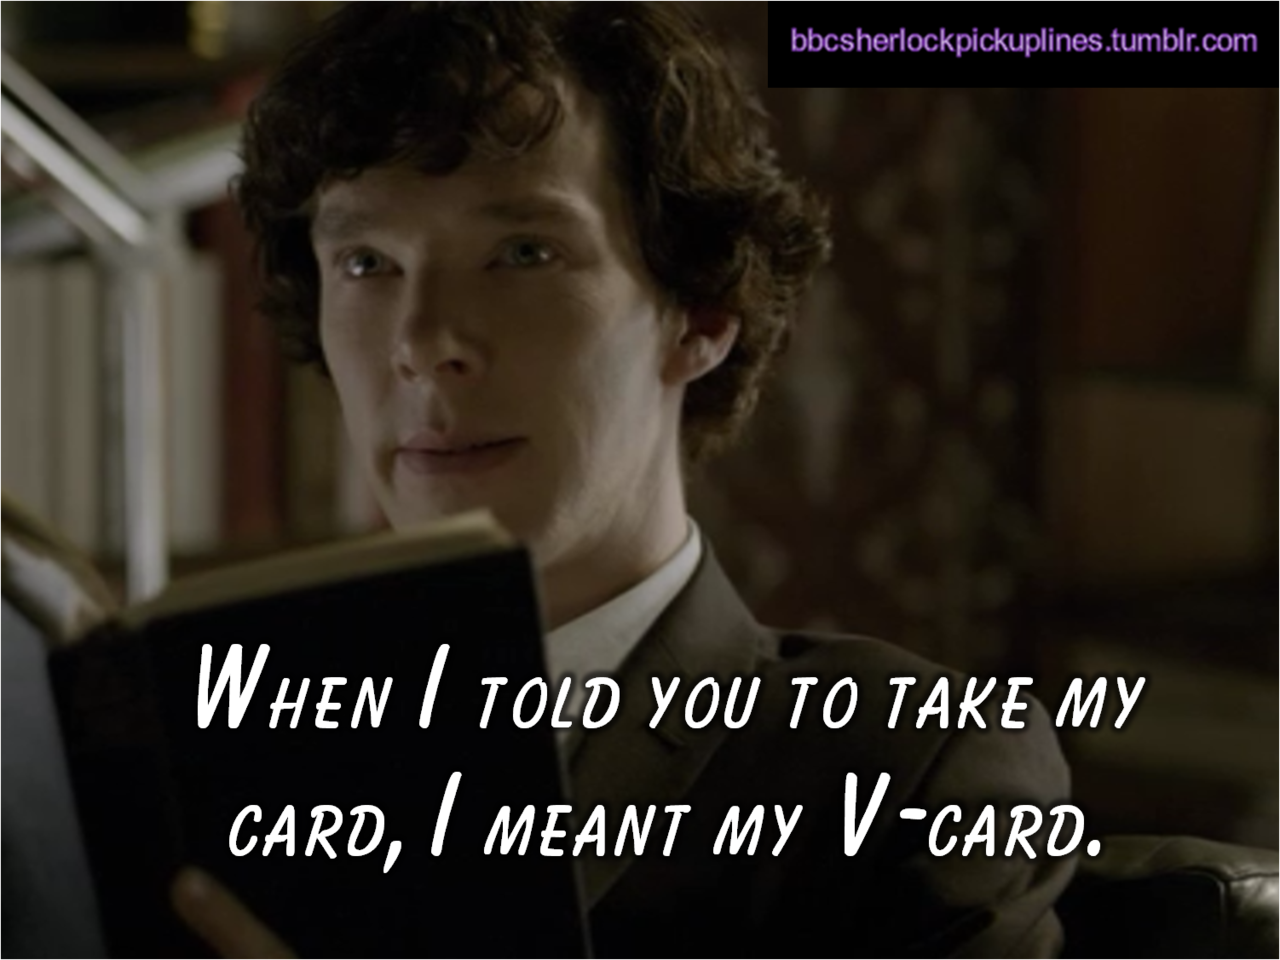 The best of The Blind Banker references, from BBC Sherlock pick-up lines.